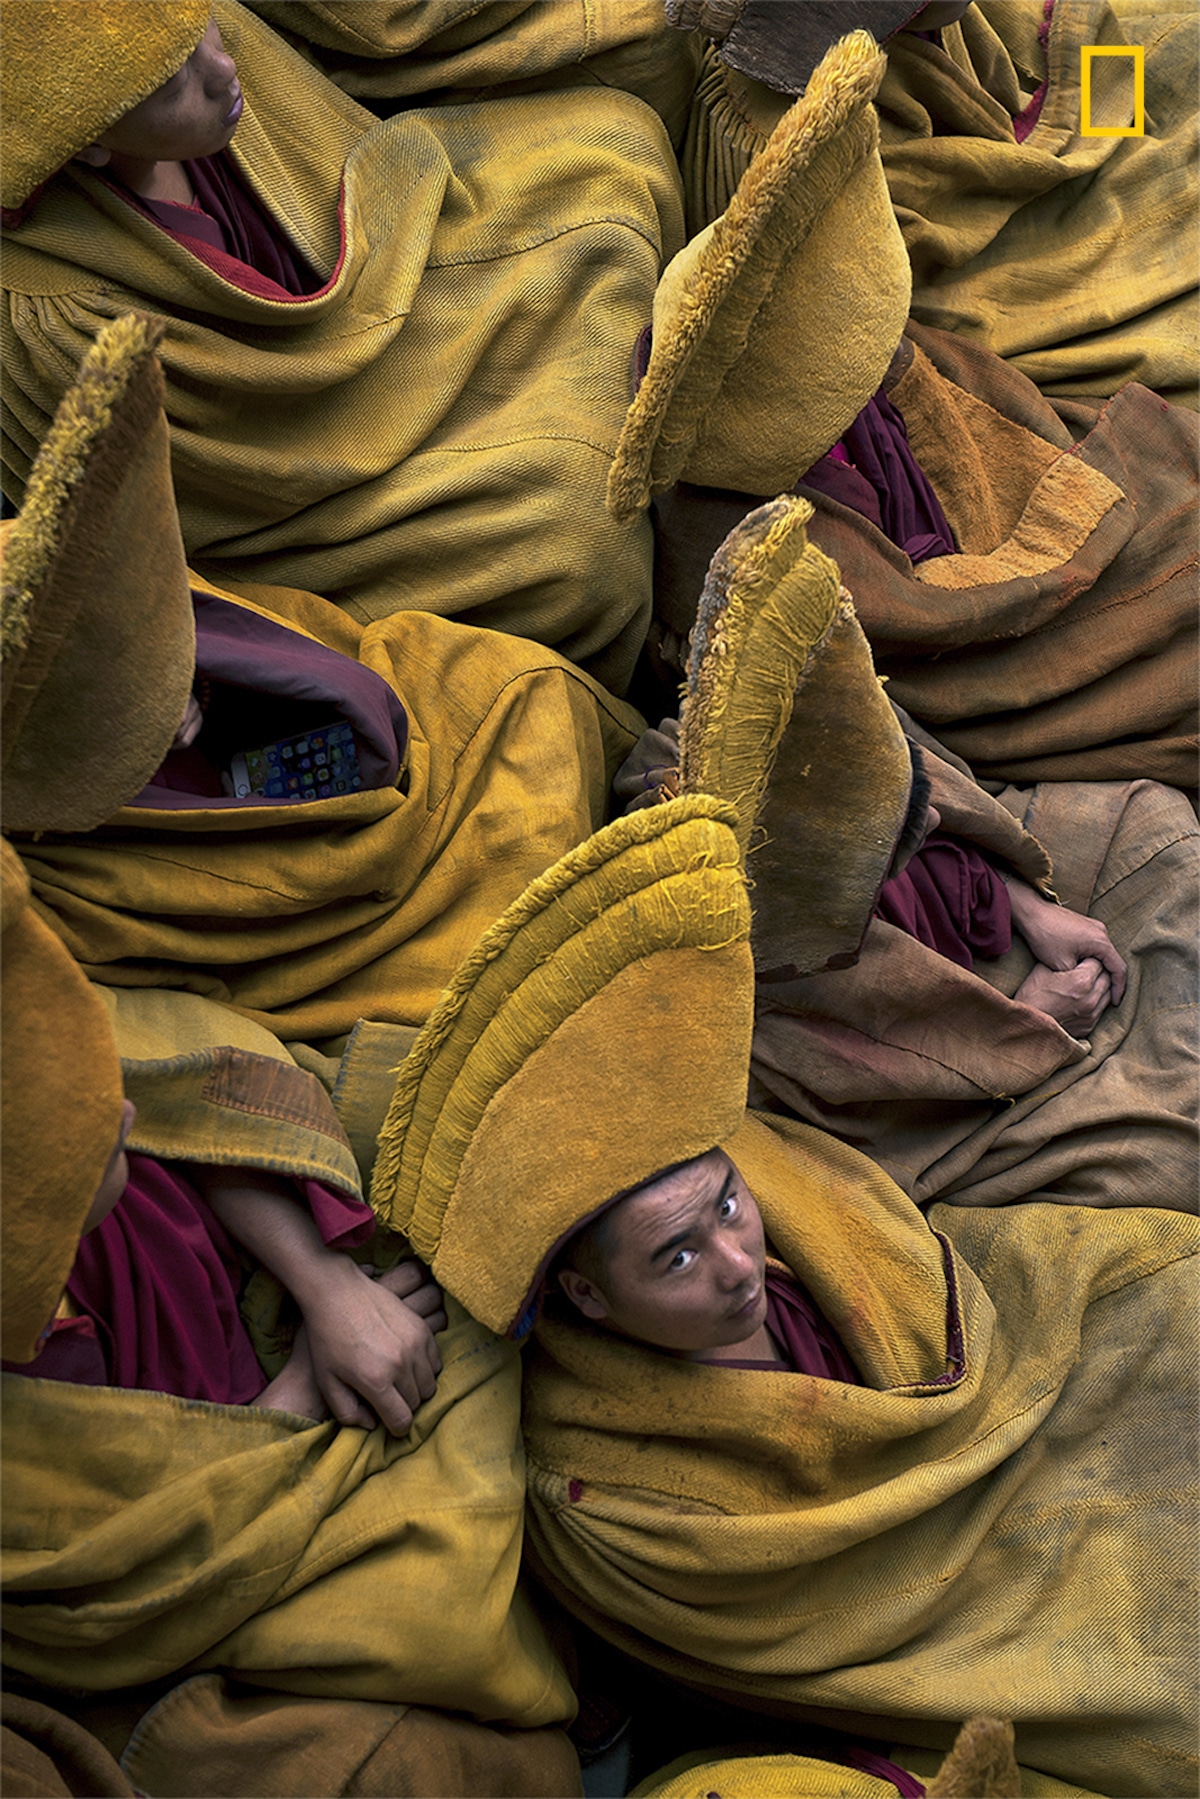 National Geographic Photo Contest for Travel Photography